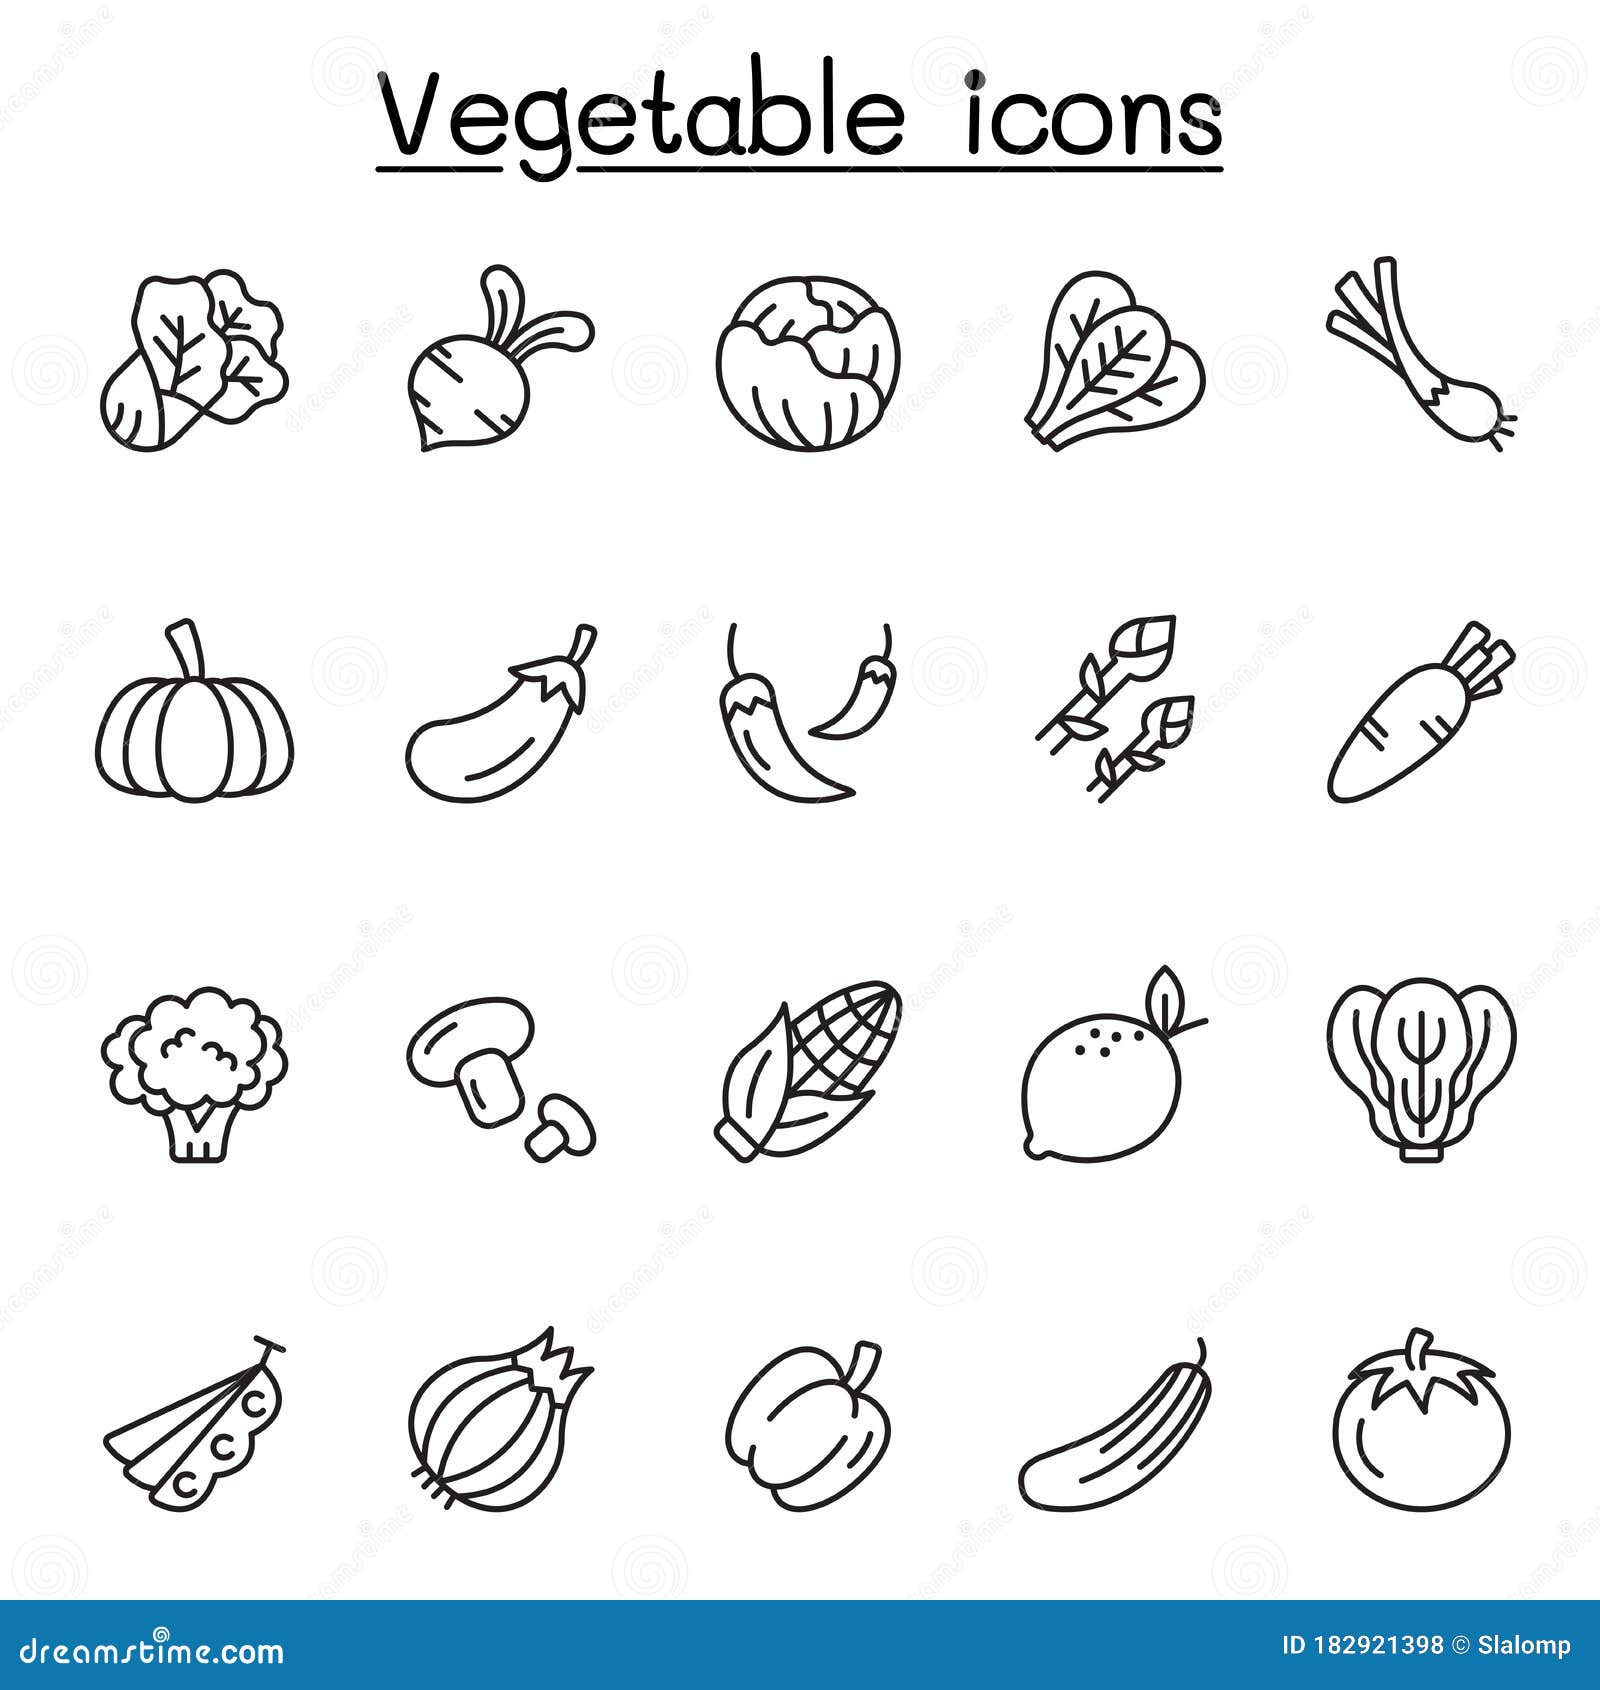 Vegetable Icons Set in Thin Line Stlye Stock Vector - Illustration of ...